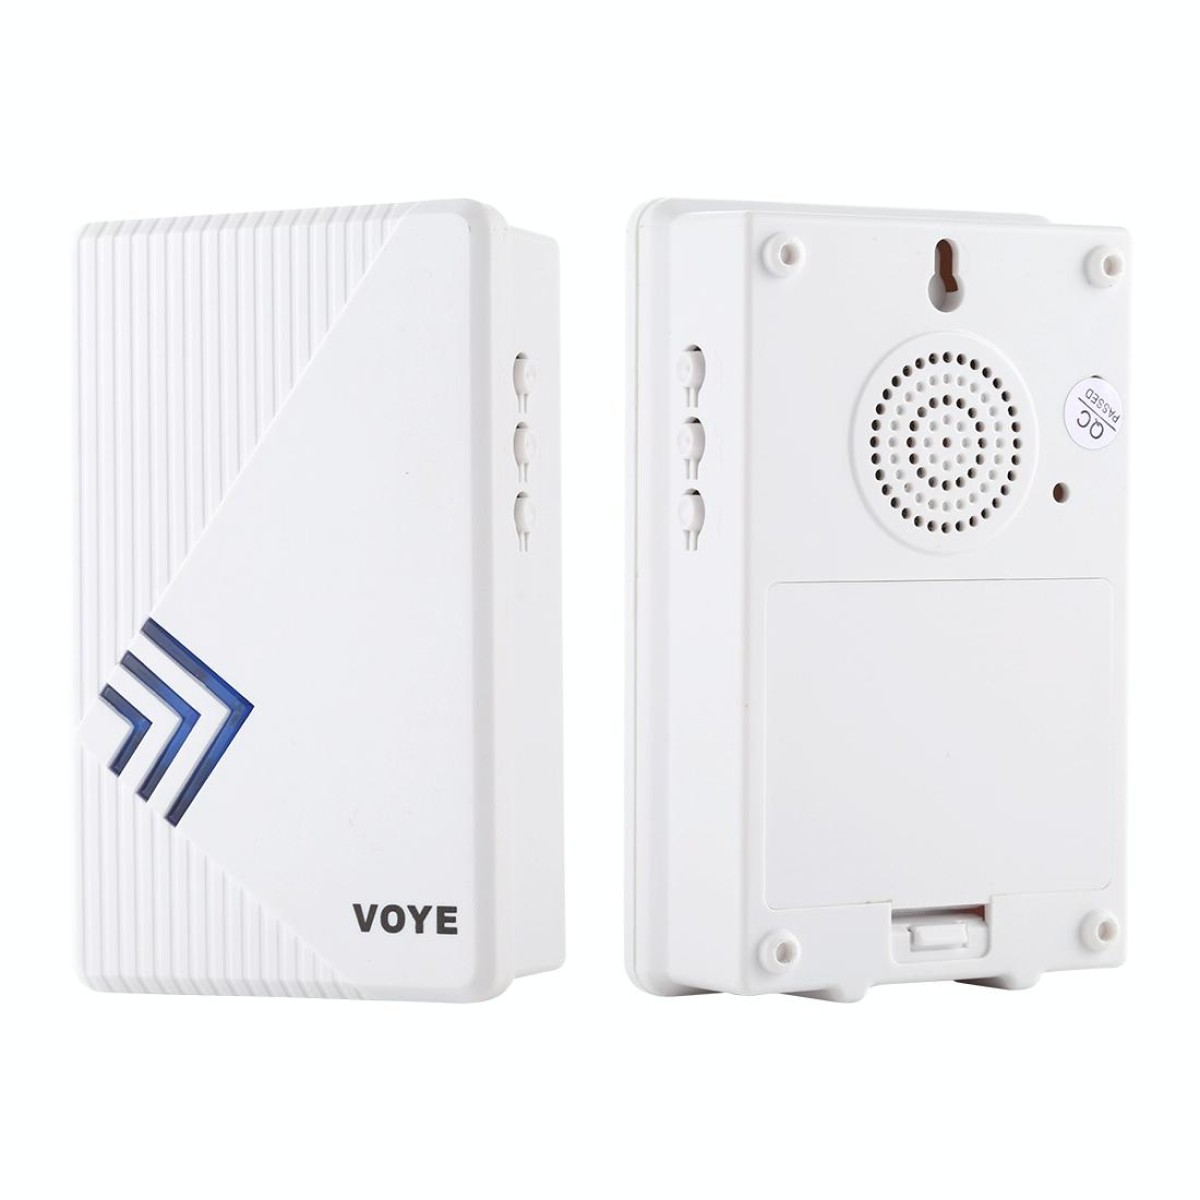 VOYE V022A Home Music Remote Control Wireless Doorbell with 38 Polyphony Sounds (White)